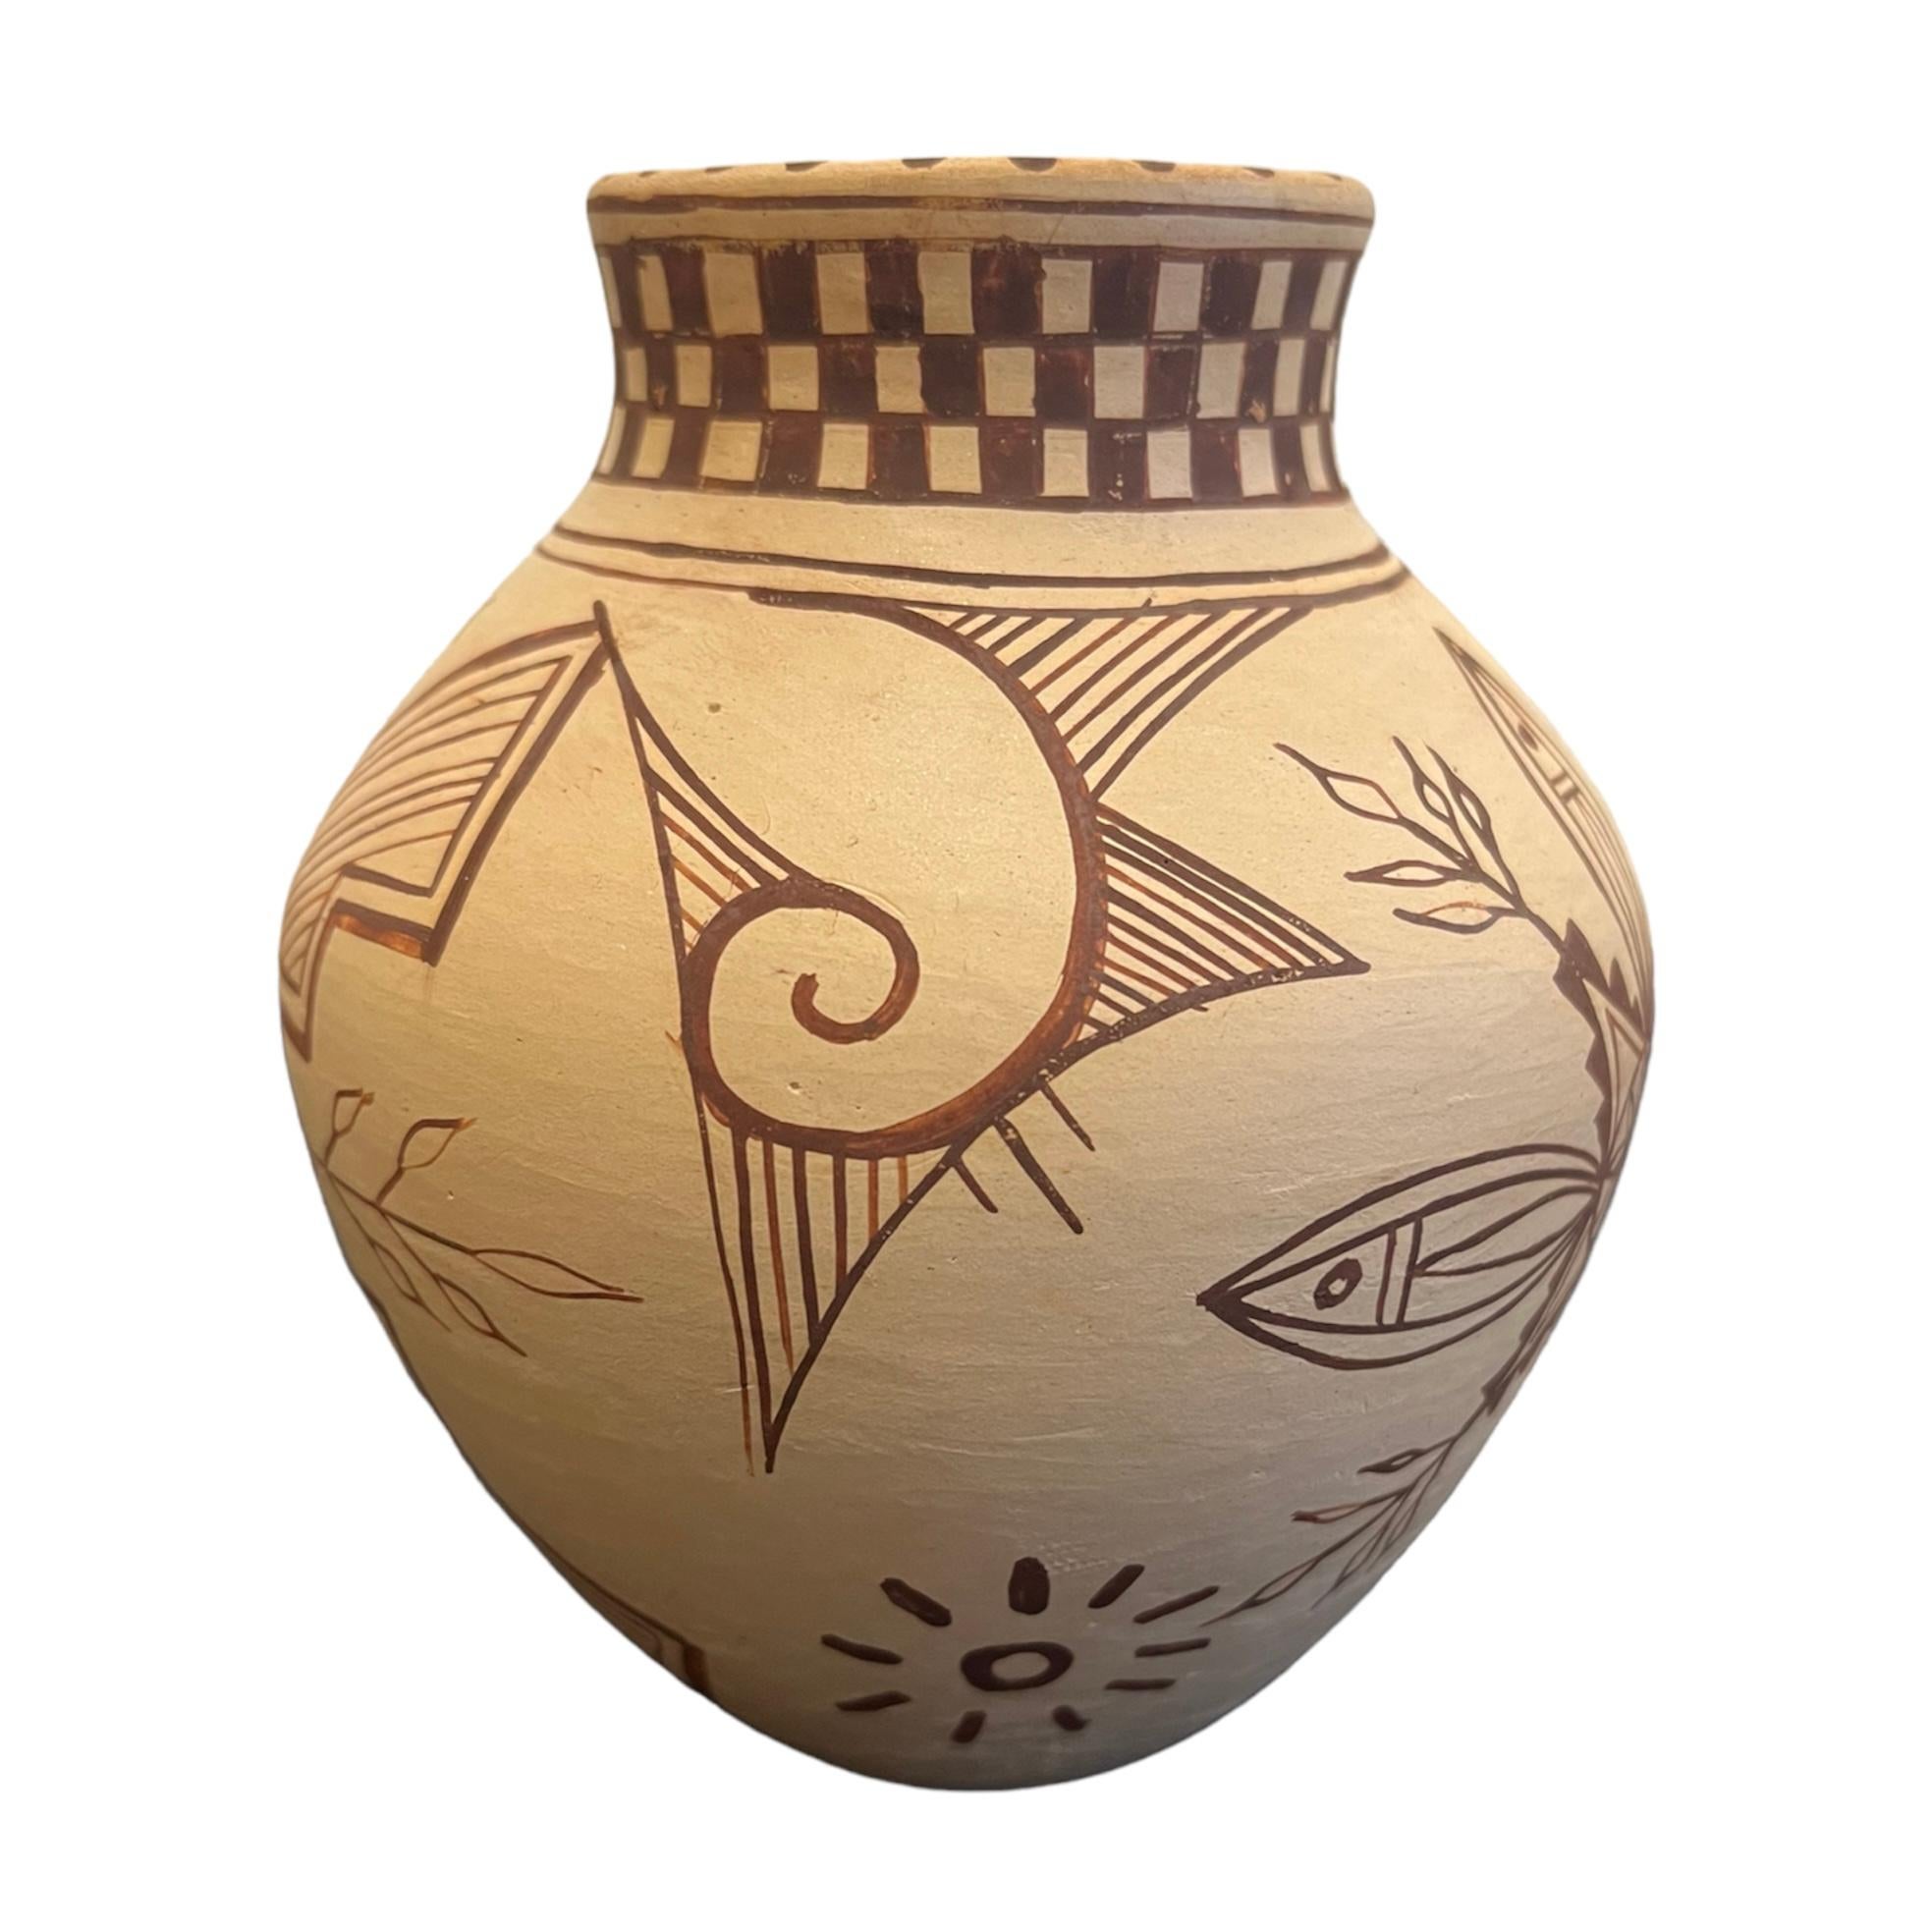 $750
A collaborative work by Jacob and Kelly Frye. Vase has a Hopi slip with hand painting in a  tansy mustard glaze.  

6”x 5”x 5”

Born in Santa Fe, New Mexico, Jacob Thomas Frye is a fourth-generation potter and painter from Tesuque Pueblo.